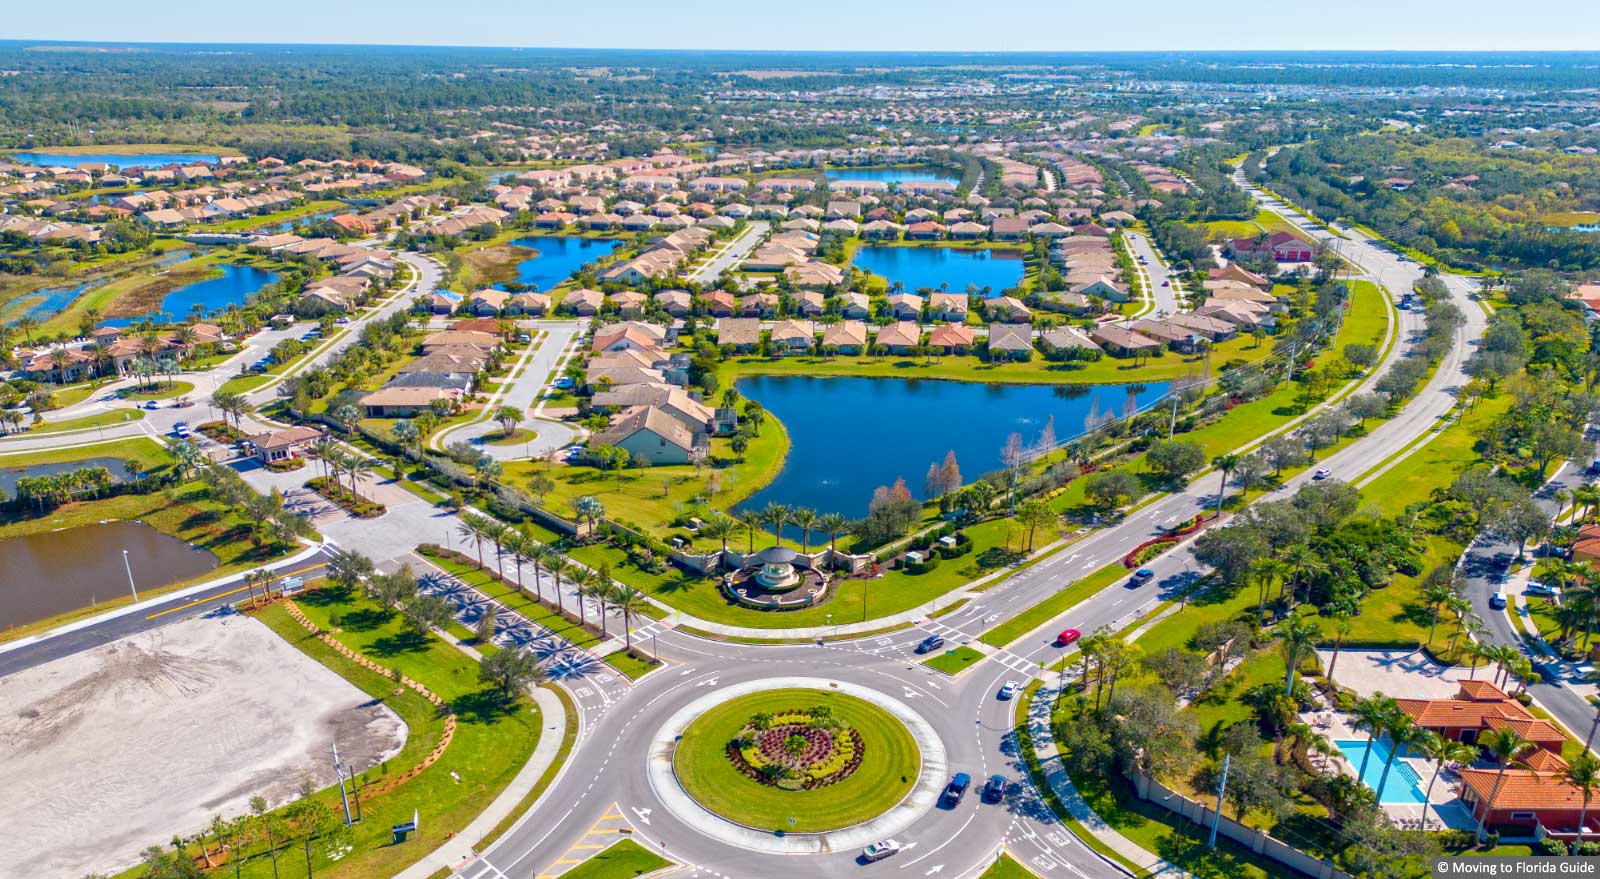 Aerial view of Sarasota homes with colorful tile roofs and water views